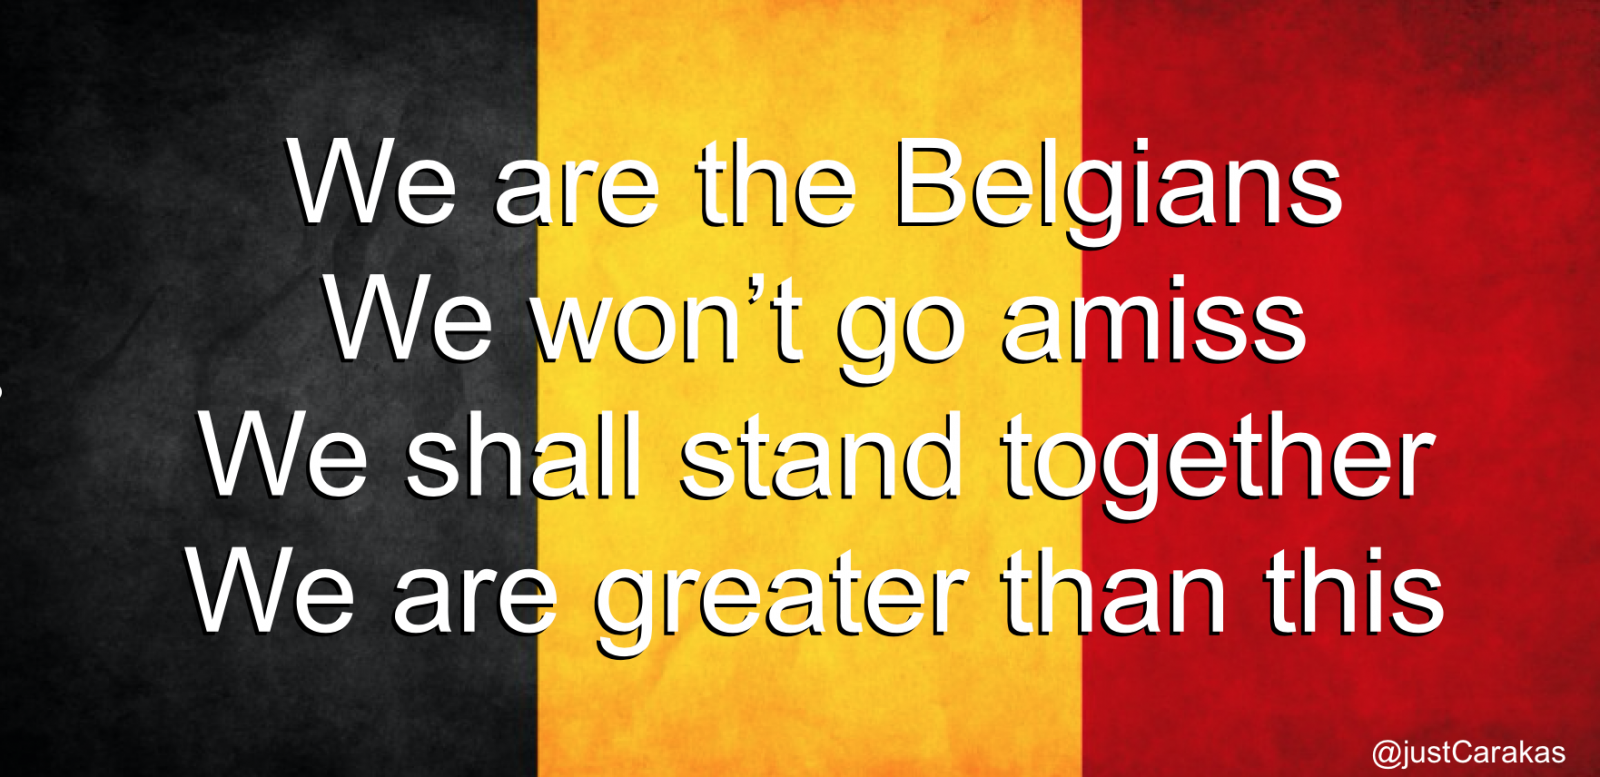 We are the Belgians. We won’t go amiss. We shall stand together. We are greater than this.